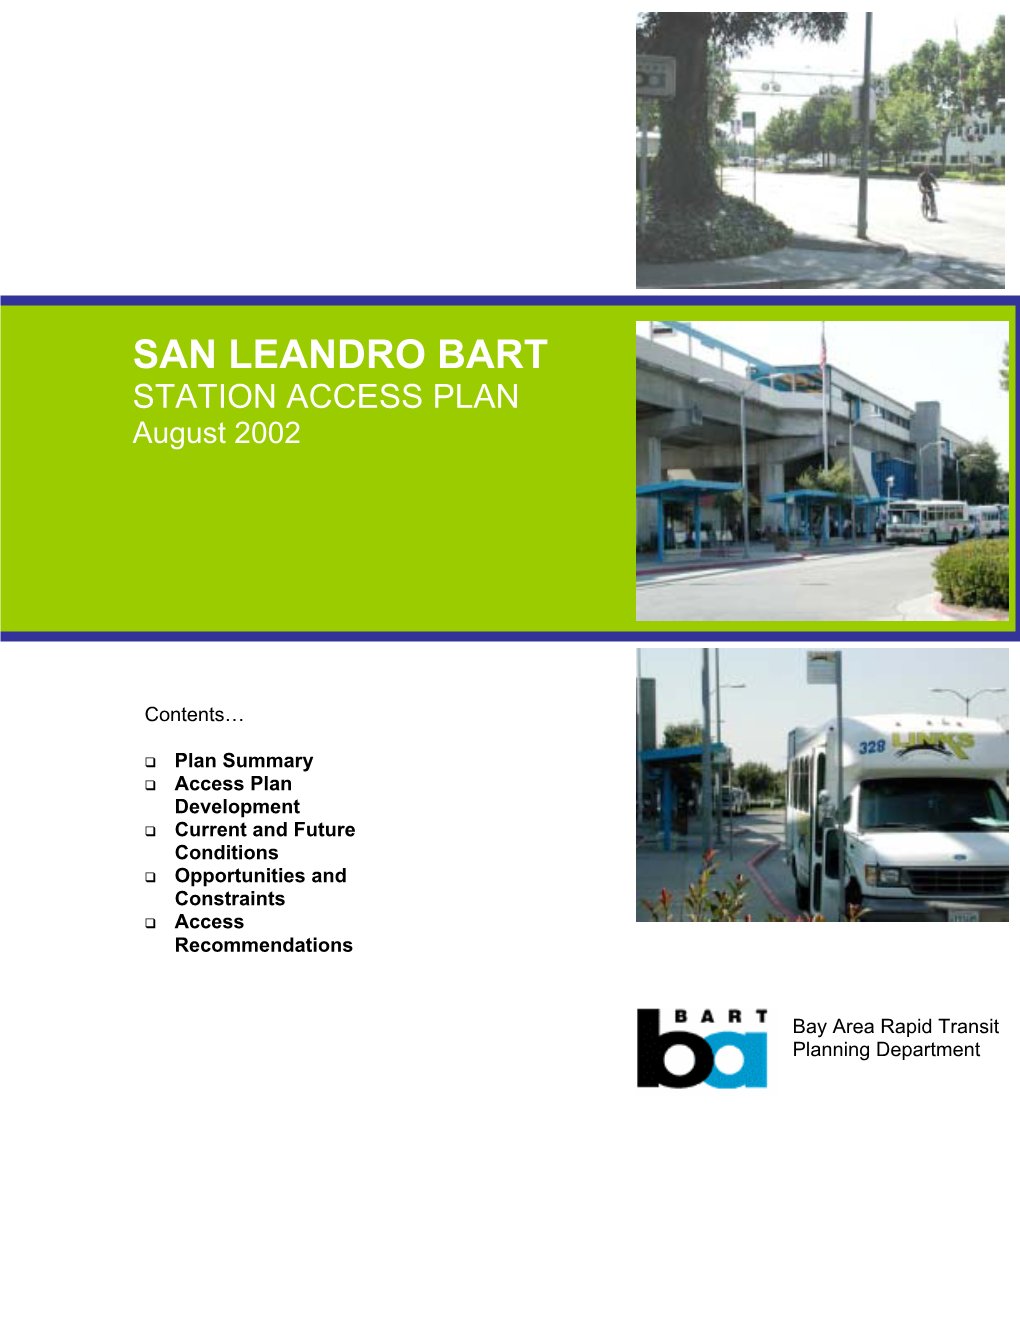 San Leandro Station Area Neighborhood Demographics the San Leandro BART Station Is Located in Central San Leandro, Just Under ¼ Mile from Downtown San Leandro